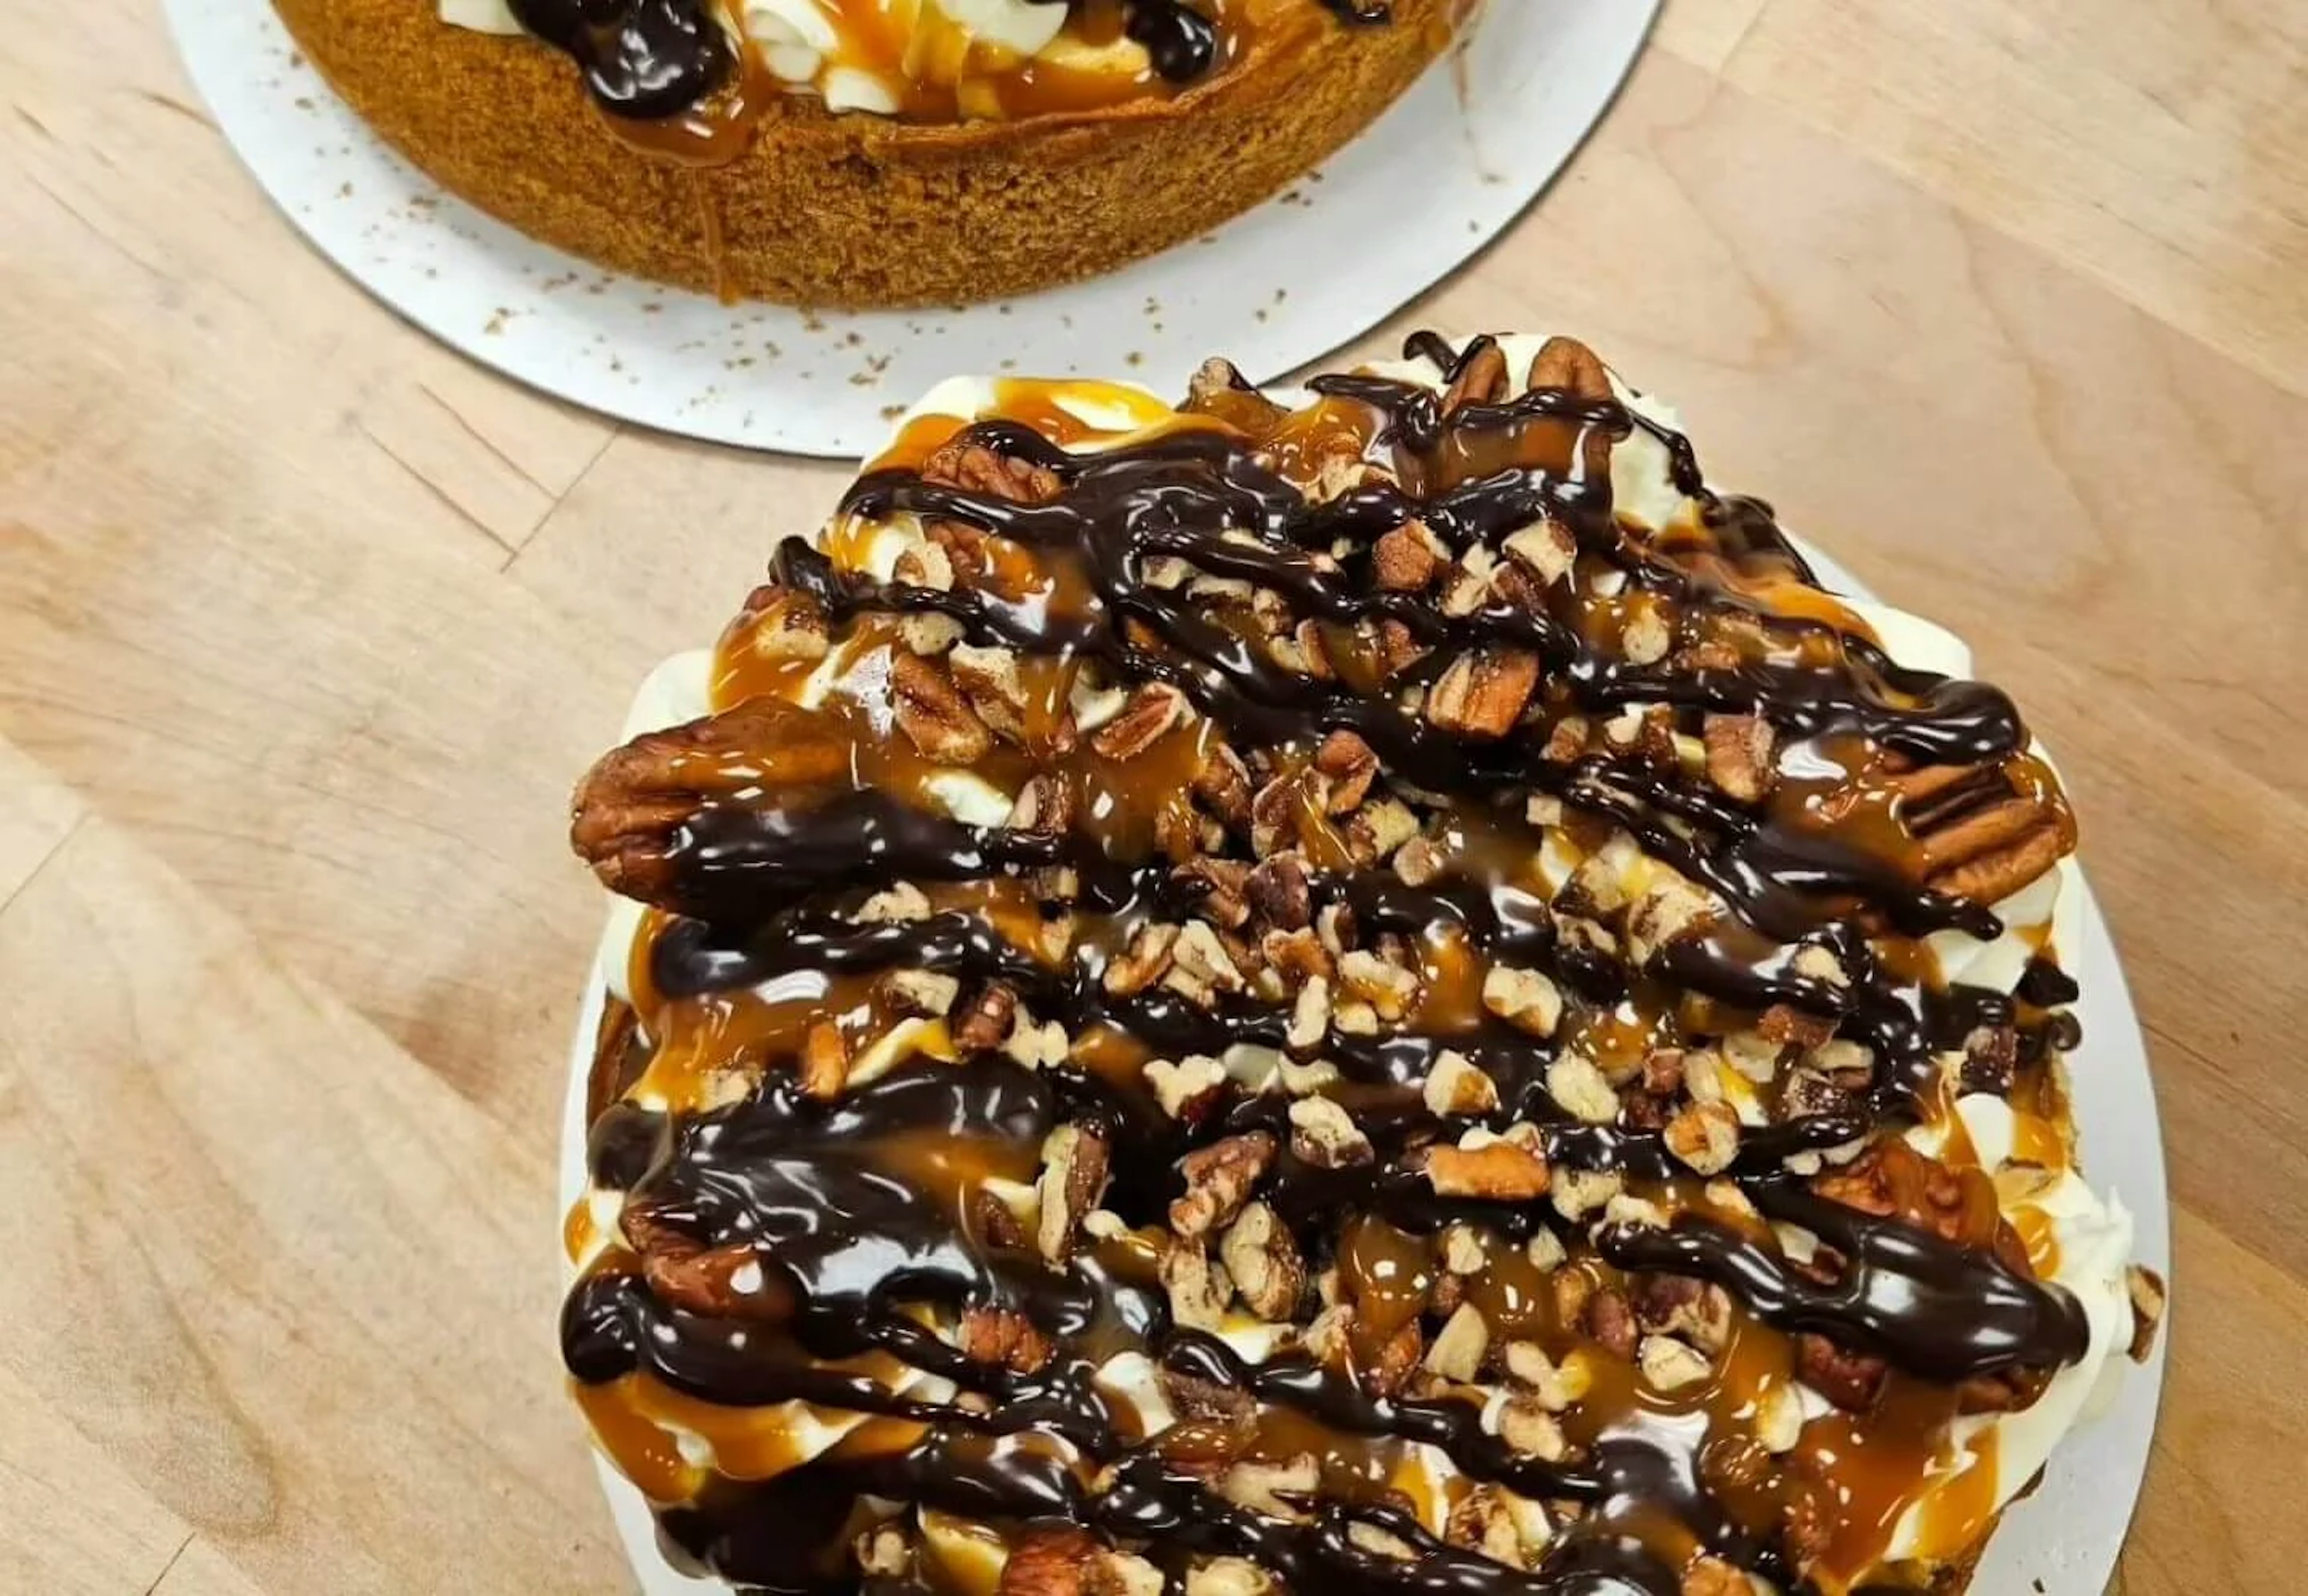 A cake covered in caramel, fudge and pecans.